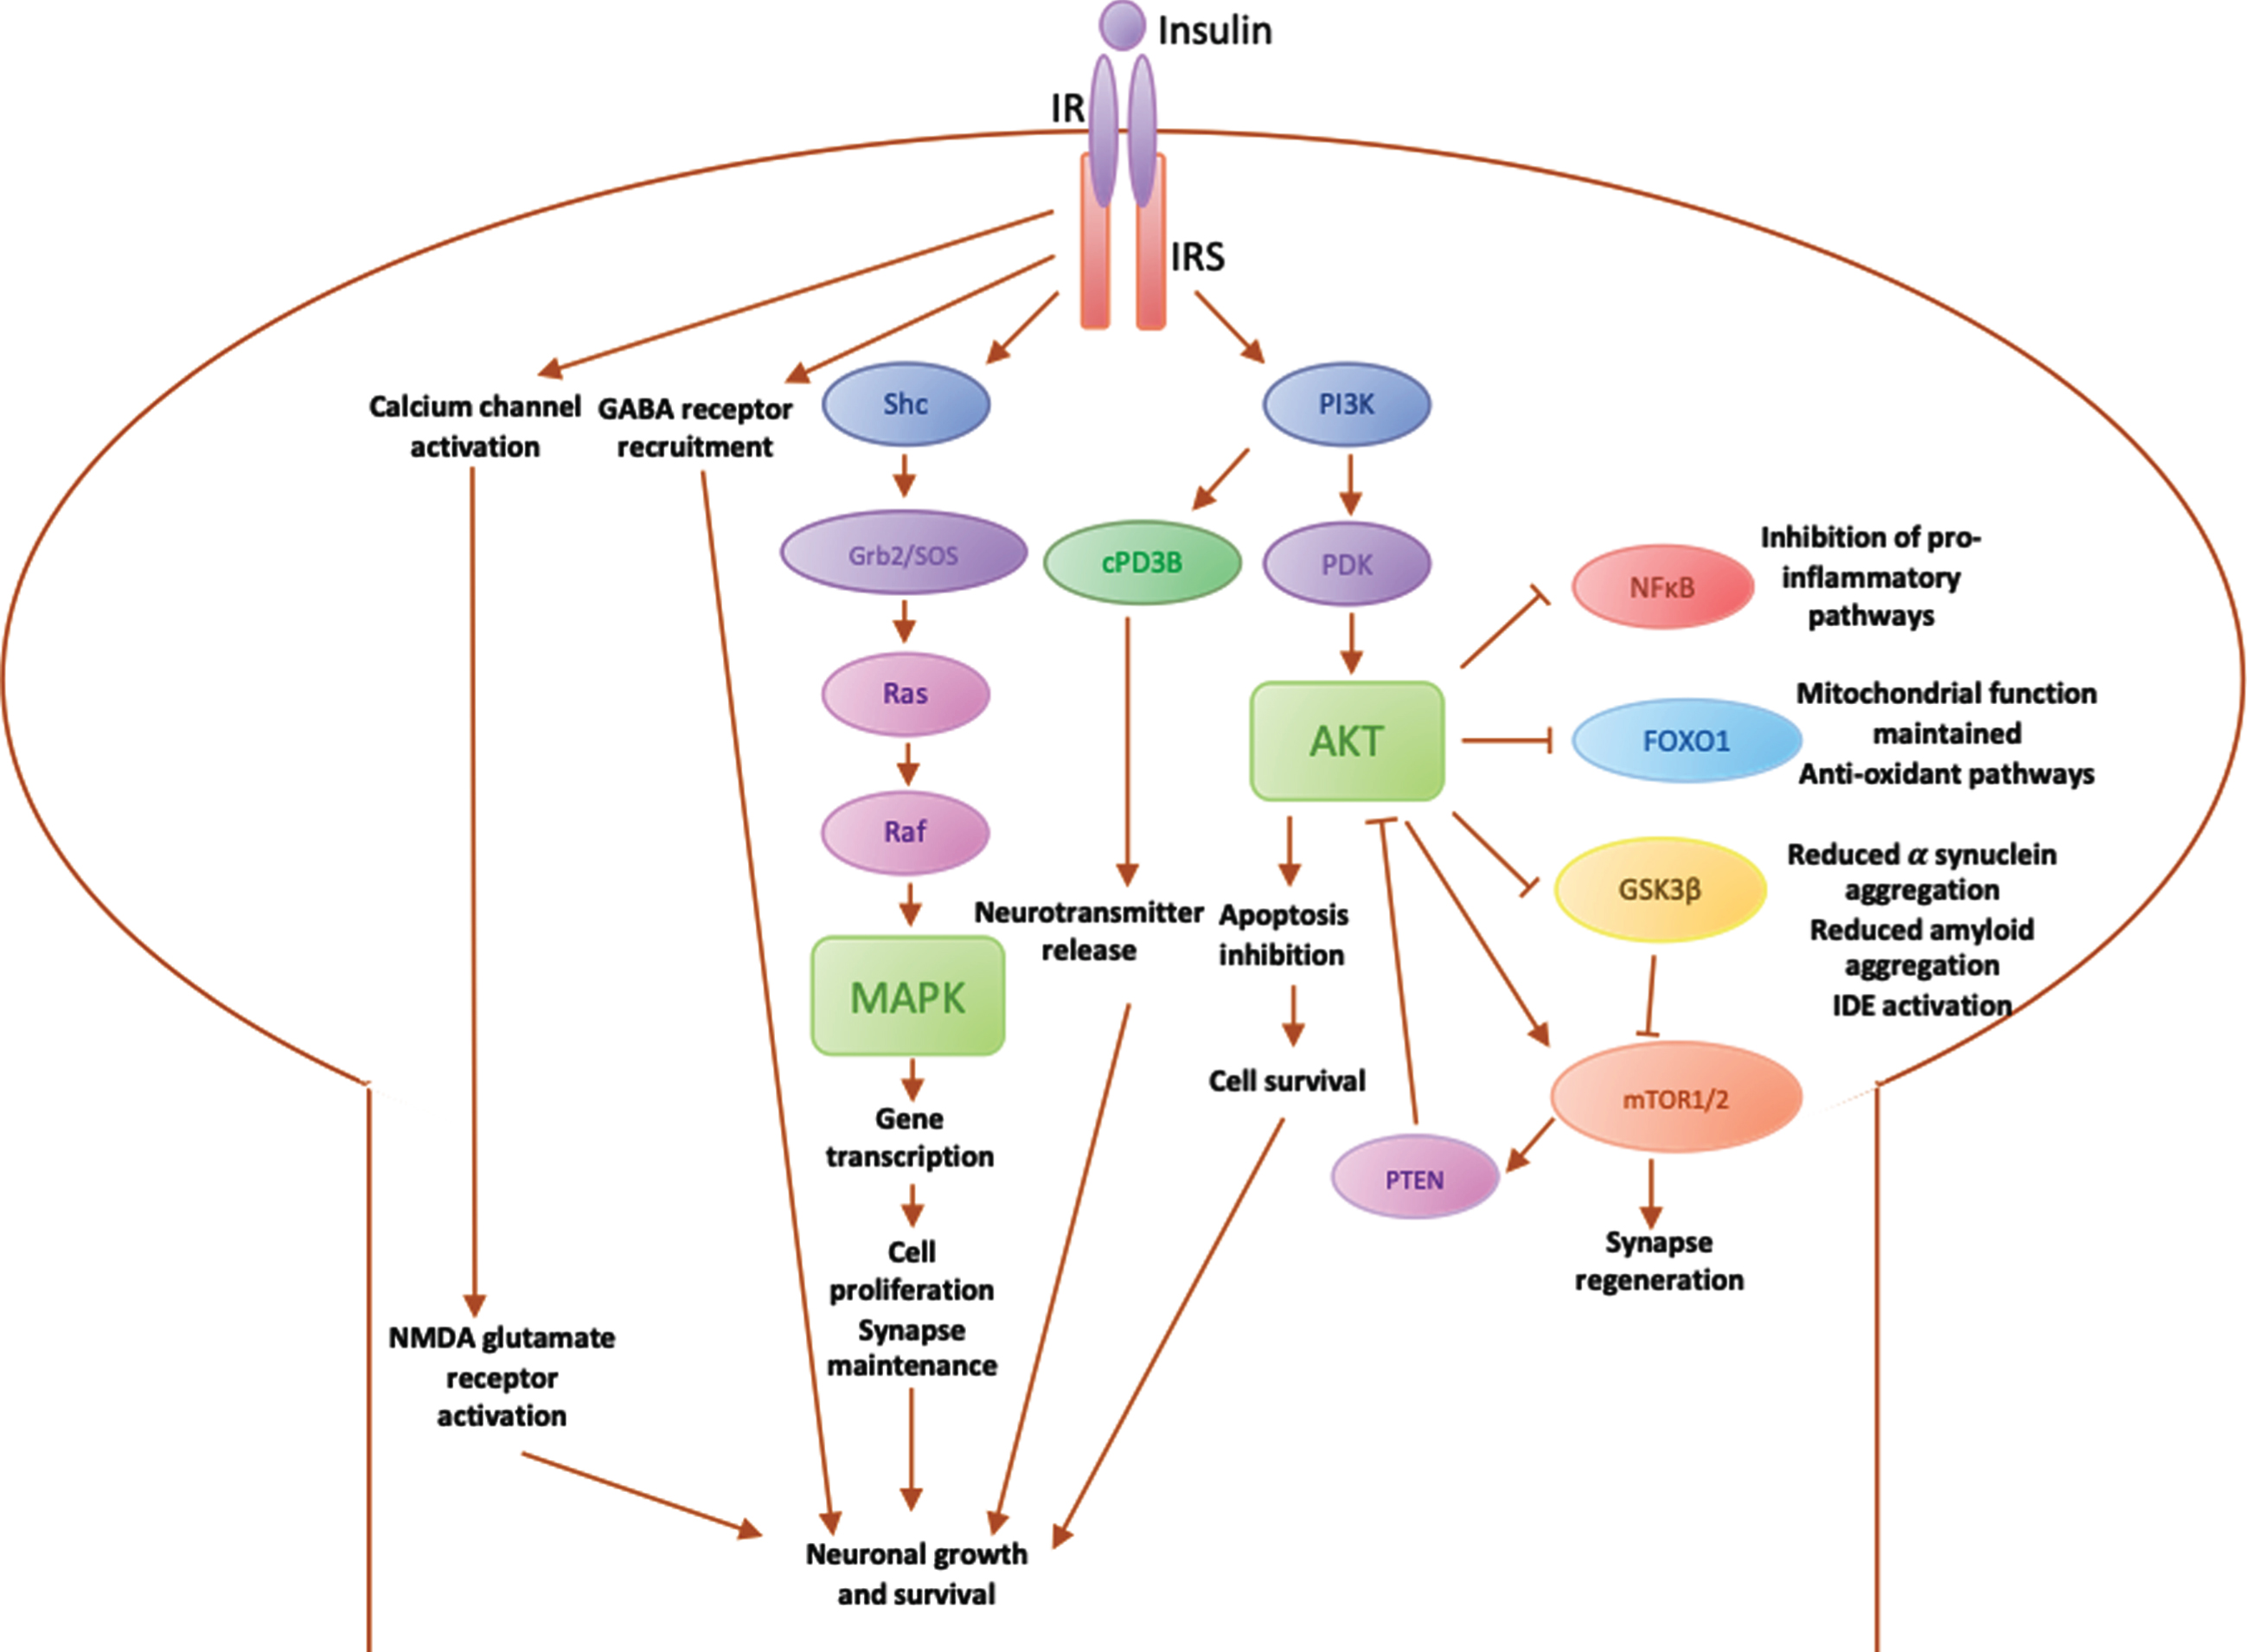 Diagrammatic summary of main pathways involved in insulin signalling in the brain. IR, insulin receptor; IRS, insulin receptor substrate; PI3K, phosphoinositide-3-kinase; PDK, 3-phosphoinositide-dependent protein kinase; Akt, Protein kinase B (PKB), plays a key role in activating downstream regulators of cell metabolism, proliferation and survival; PTEN, phosphatase and tensin homolog, regulates PI3K/Akt pathway by inhibiting Akt; mTOR, mammalian target of rapamycin, regulates cell metabolism and proliferation and synapse regeneration in neurons; GSK3β, glycogen synthase kinase 3, downstream mediator involved in IDE inactivation, leading to an increase in α synuclein expression, which aggregate into amyloid fibres; FOXO1, Forkhead box O1, involved in maintaining the mitochondrial electron transport chain for ATP generation and fatty acid oxidation, preventing oxidative stress; NFκB, nuclear factor κB regulates microglial activation and the expression of inflammatory mediators such as IL1β and TNFα; cPD3β, cyclic nucleotide phosphodiesterase 3β; Shc, an adaptor protein involved in the MAPK pathway; Grb2/SOS, downstream adaptor proteins in MAPK pathway; Ras, downstream protein in MAPK pathway that recruits Raf; Raf, Ras effector that stimulates a downstream signalling cascade through phosphorylation of MAPK; MAPK, mitogen-activated protein kinase, modulates downstream protein kinases involved in regulating cell proliferation, differentiation and apoptosis, maintaining neuronal growth and survival.